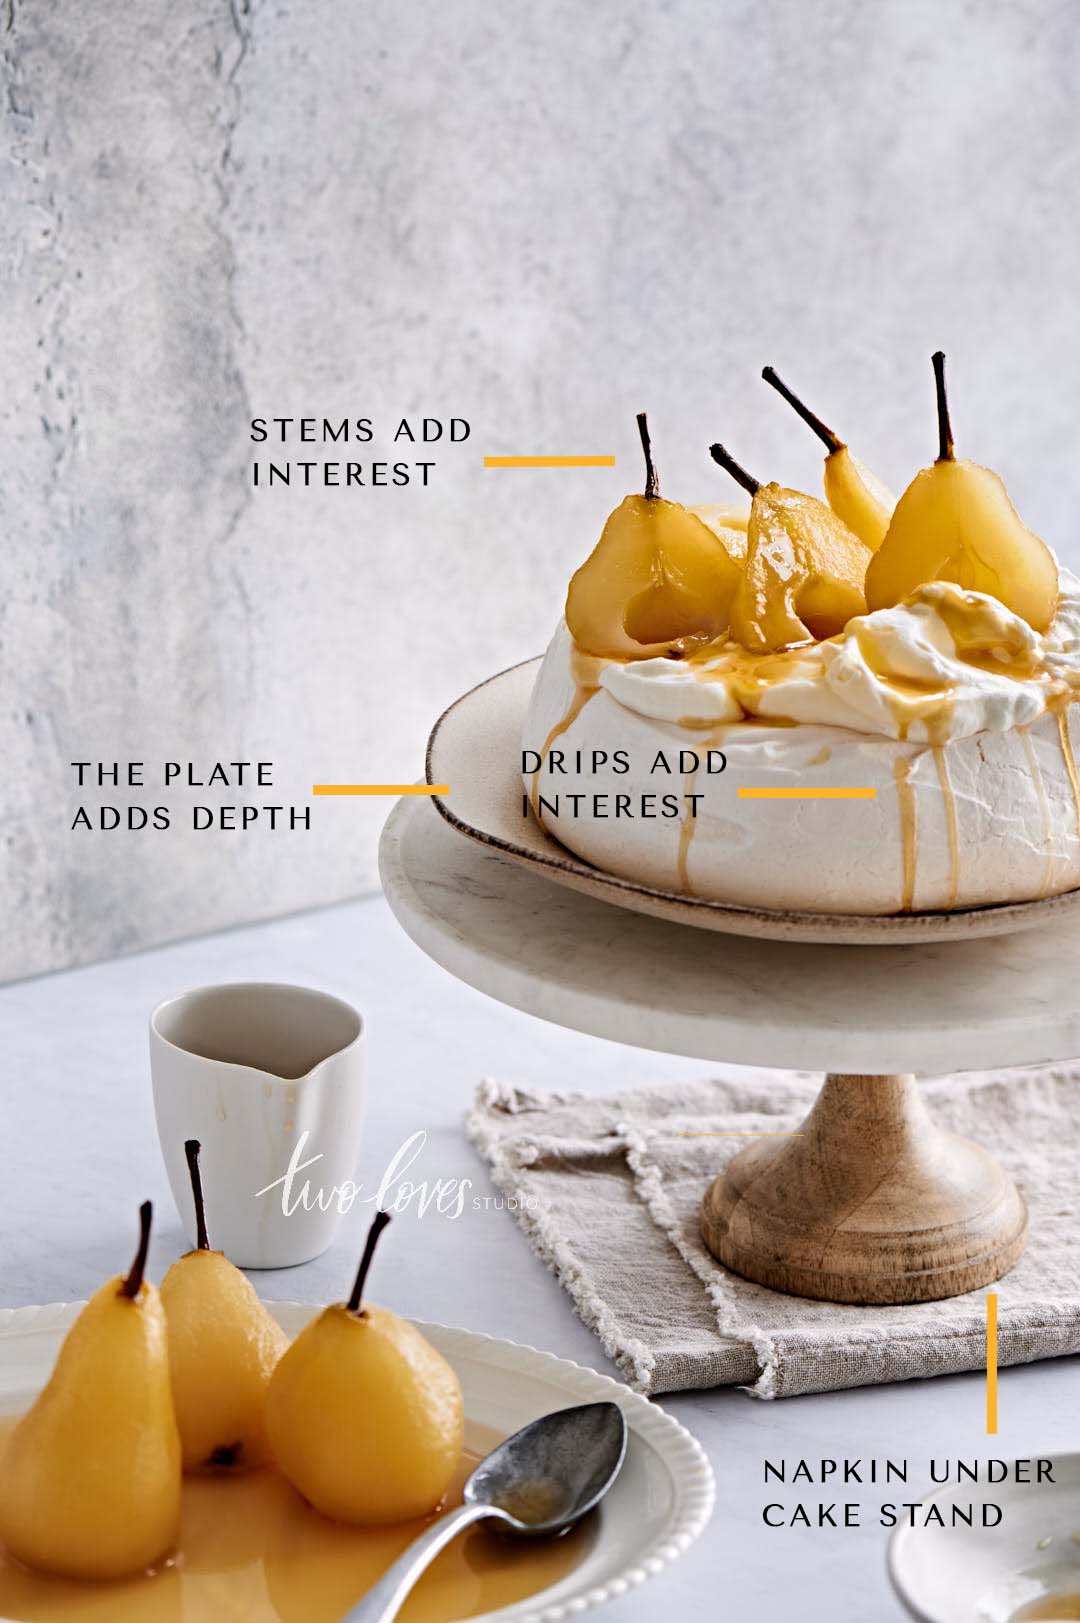 Soft marble backdrop. A meringue ontop of a cakestand. Pear fruit balanced on top. 